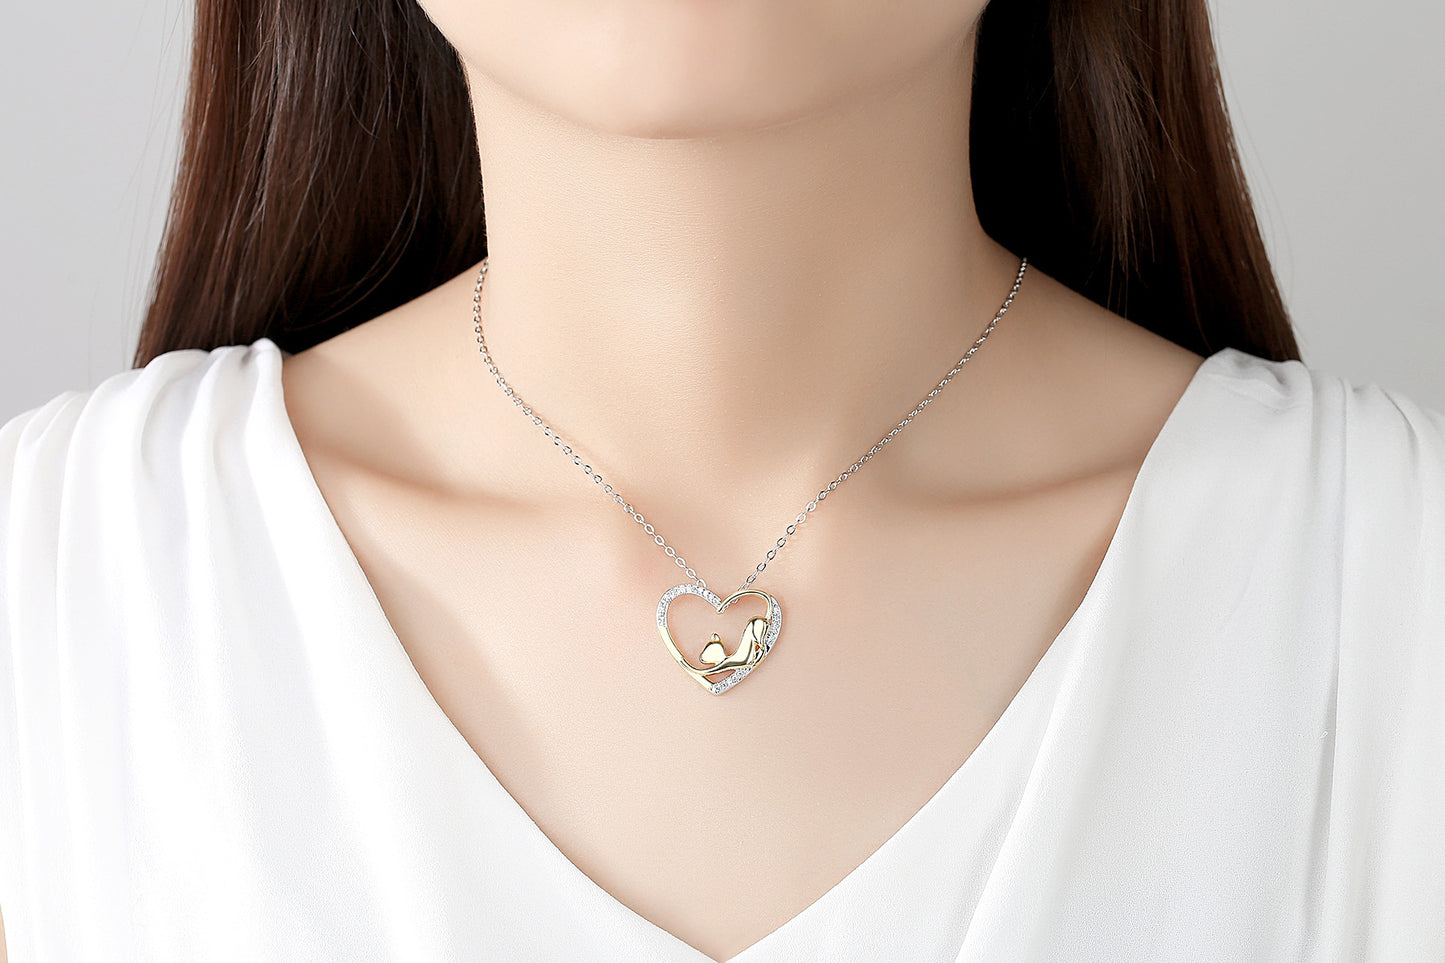 Feline Elegance: Gold-Plated Cat Heart Necklace – Perfect for Animal Lovers.